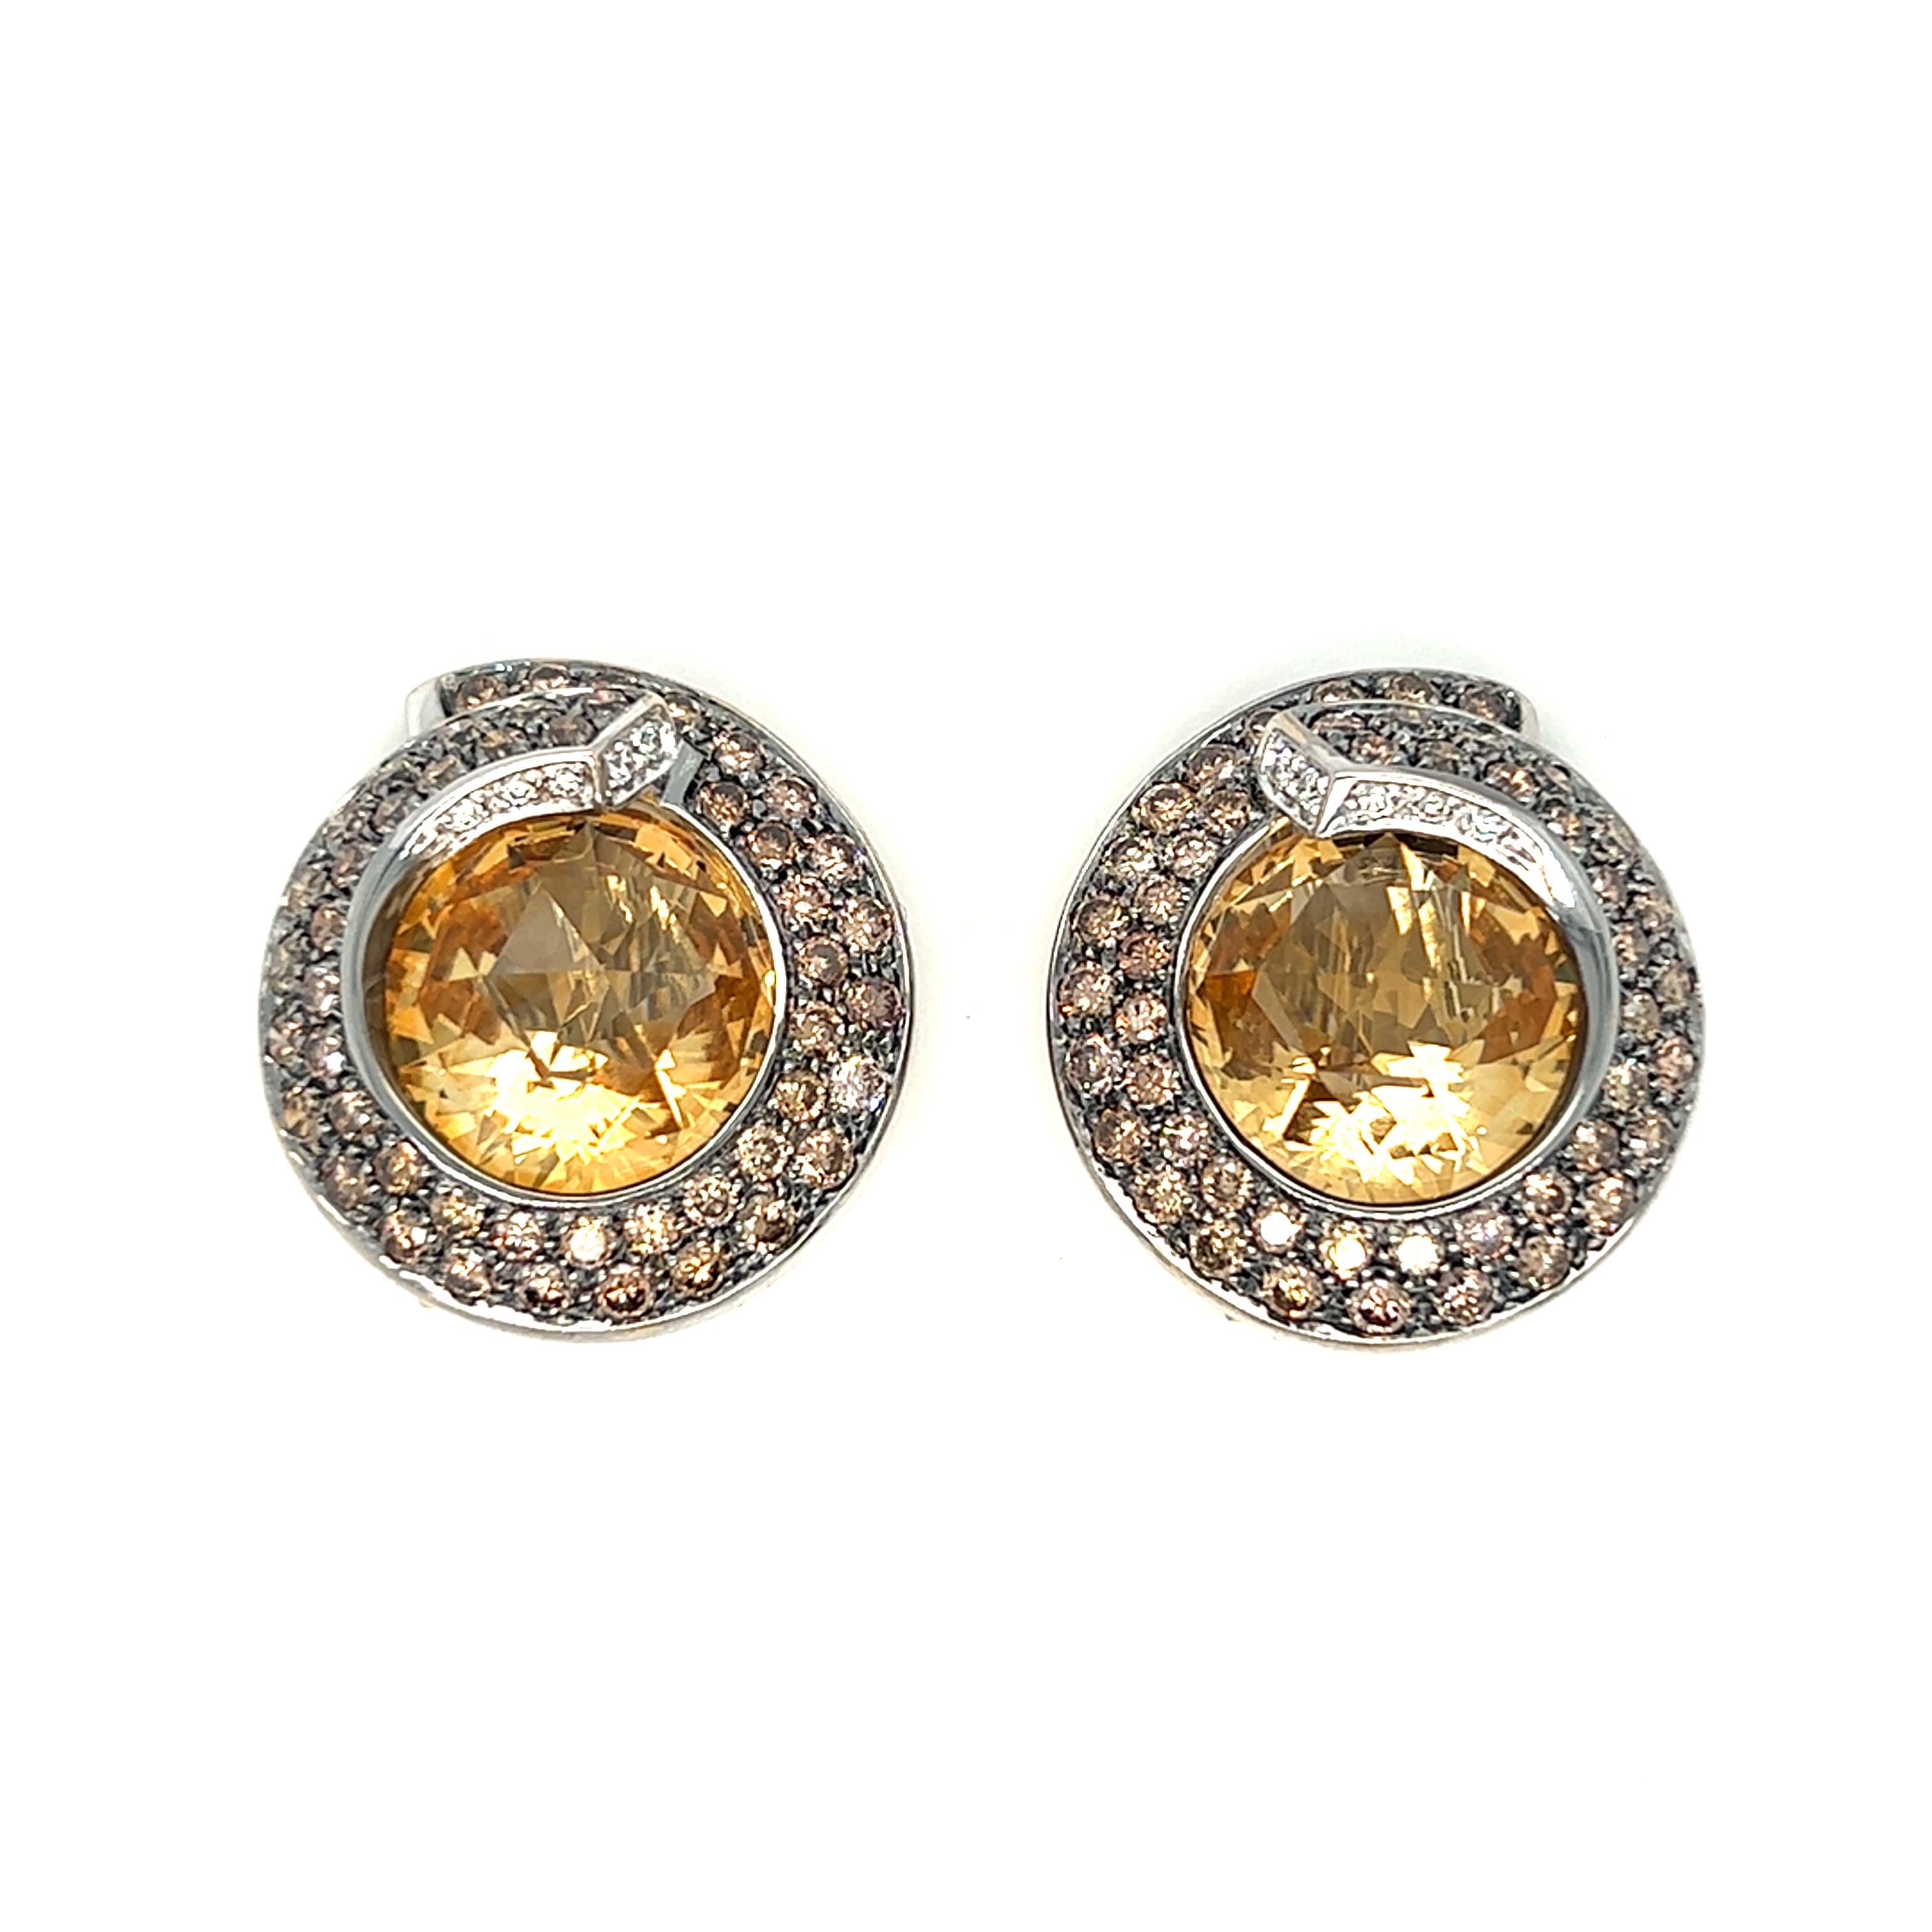 Round Cut Mangiarotti Citrine and Cognac Colored Diamond Halo Earrings 18k Gold For Sale